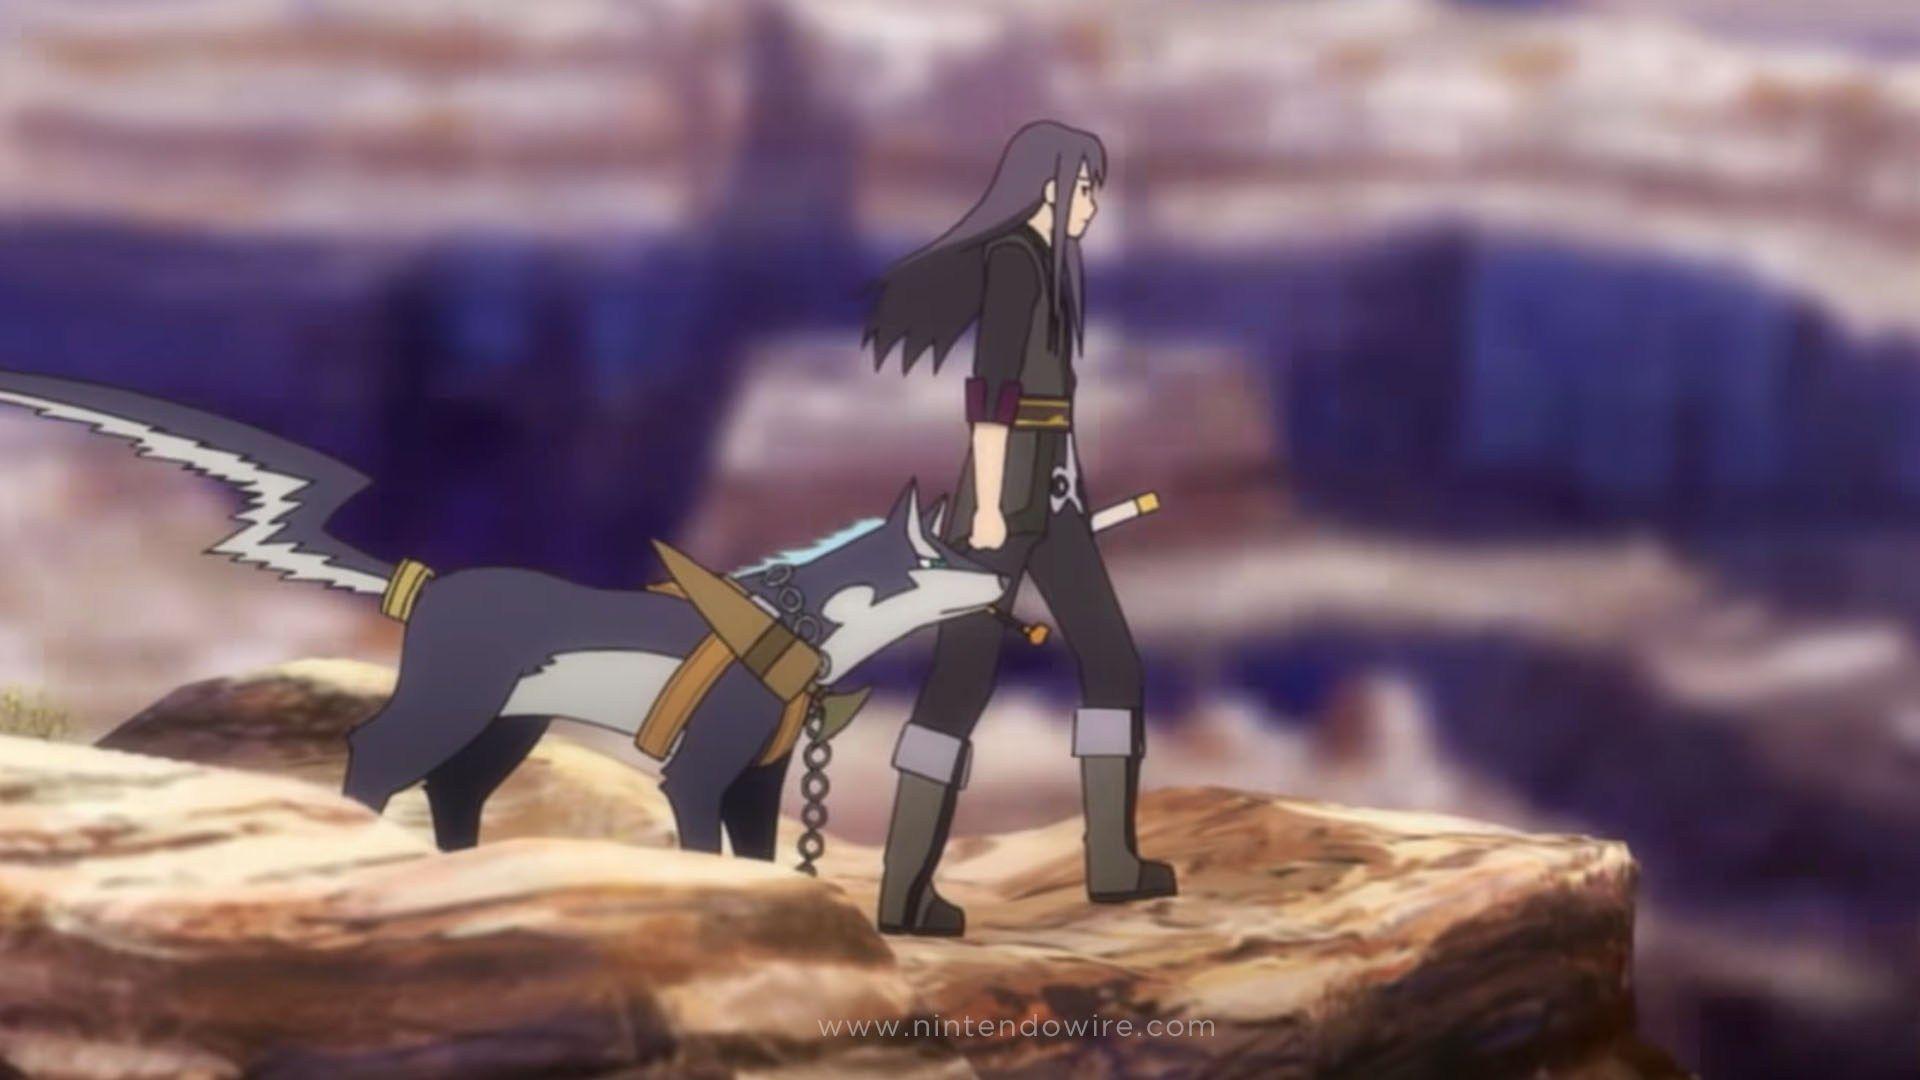 Tales of Vesperia: Definitive Edition launching January 11th, 2019